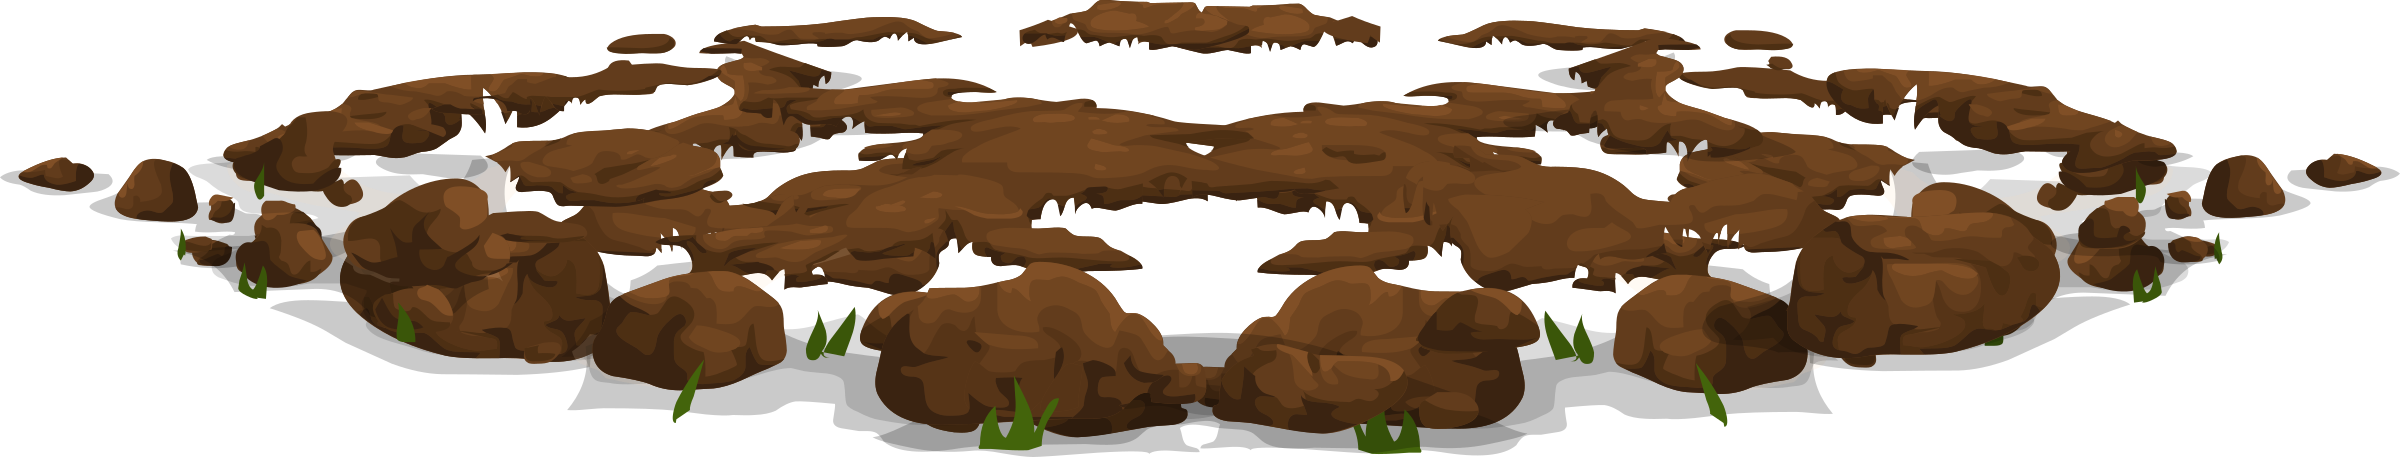  collection of dirt. Hole clipart mud pile